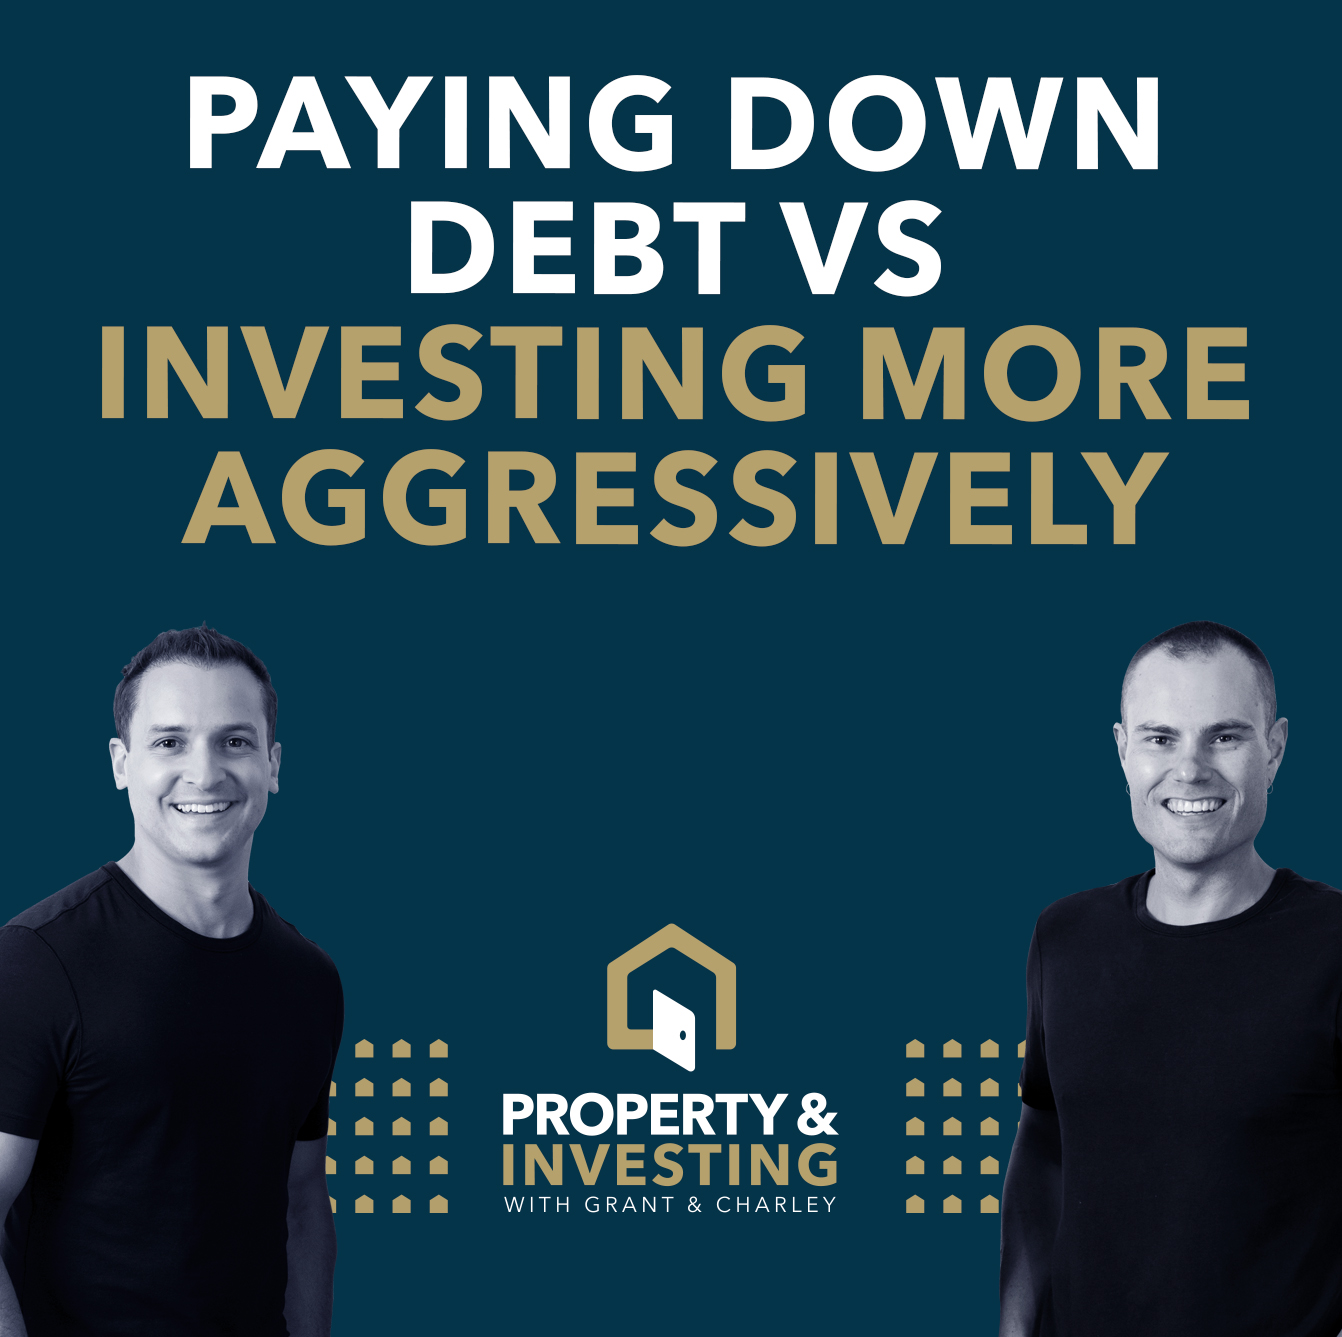 Paying Down Debt vs Investing More Aggressively